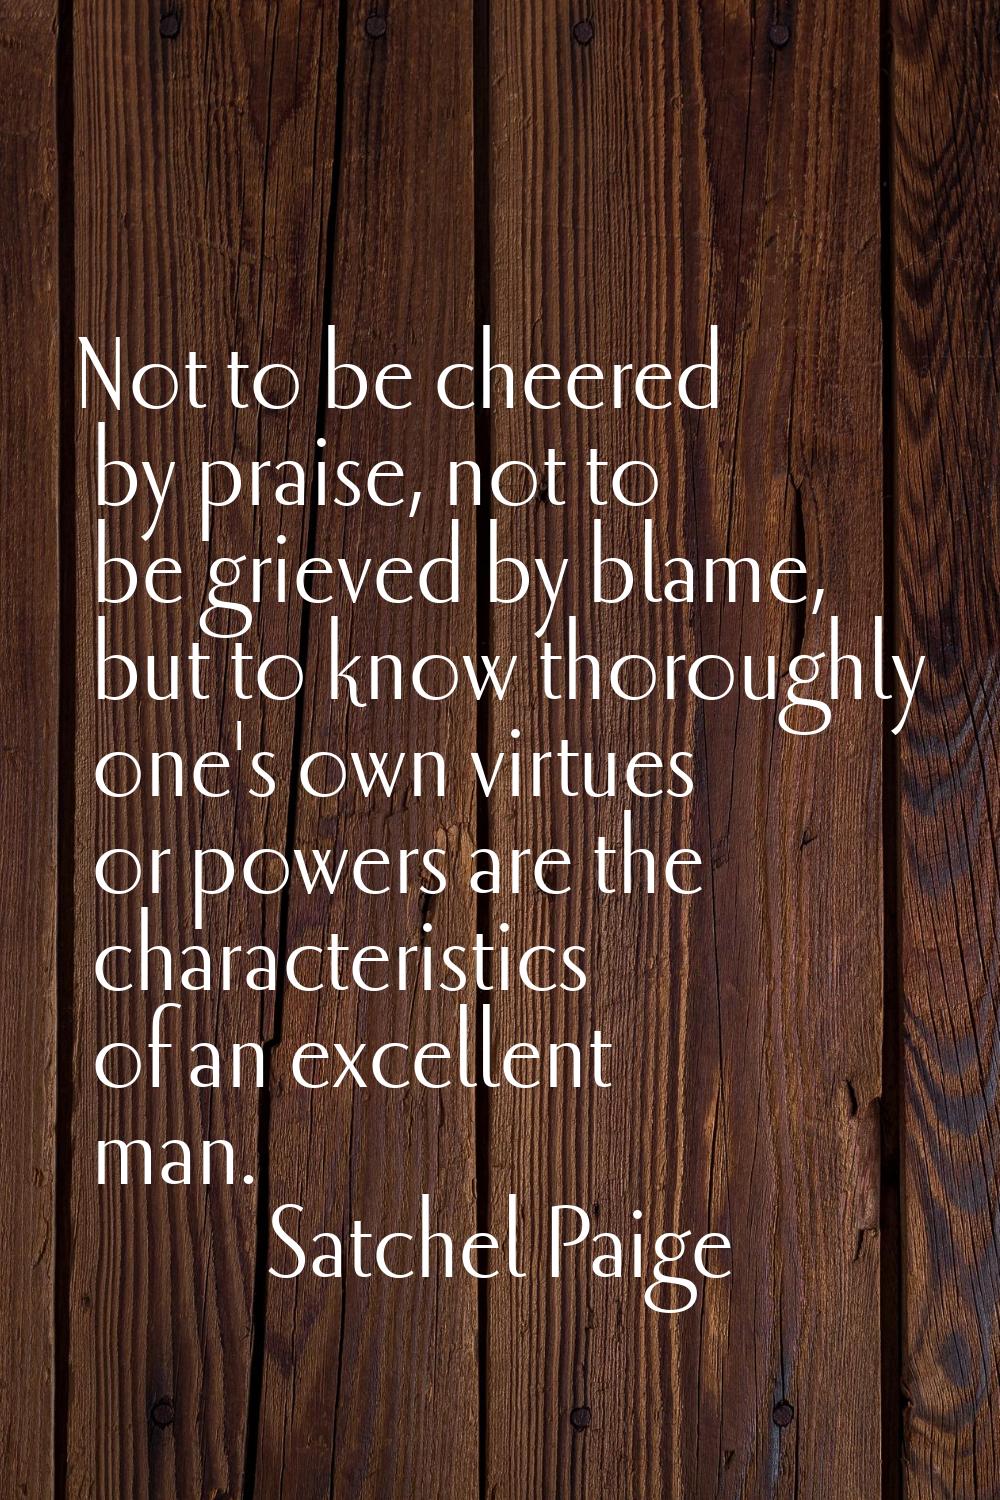 Not to be cheered by praise, not to be grieved by blame, but to know thoroughly one's own virtues o